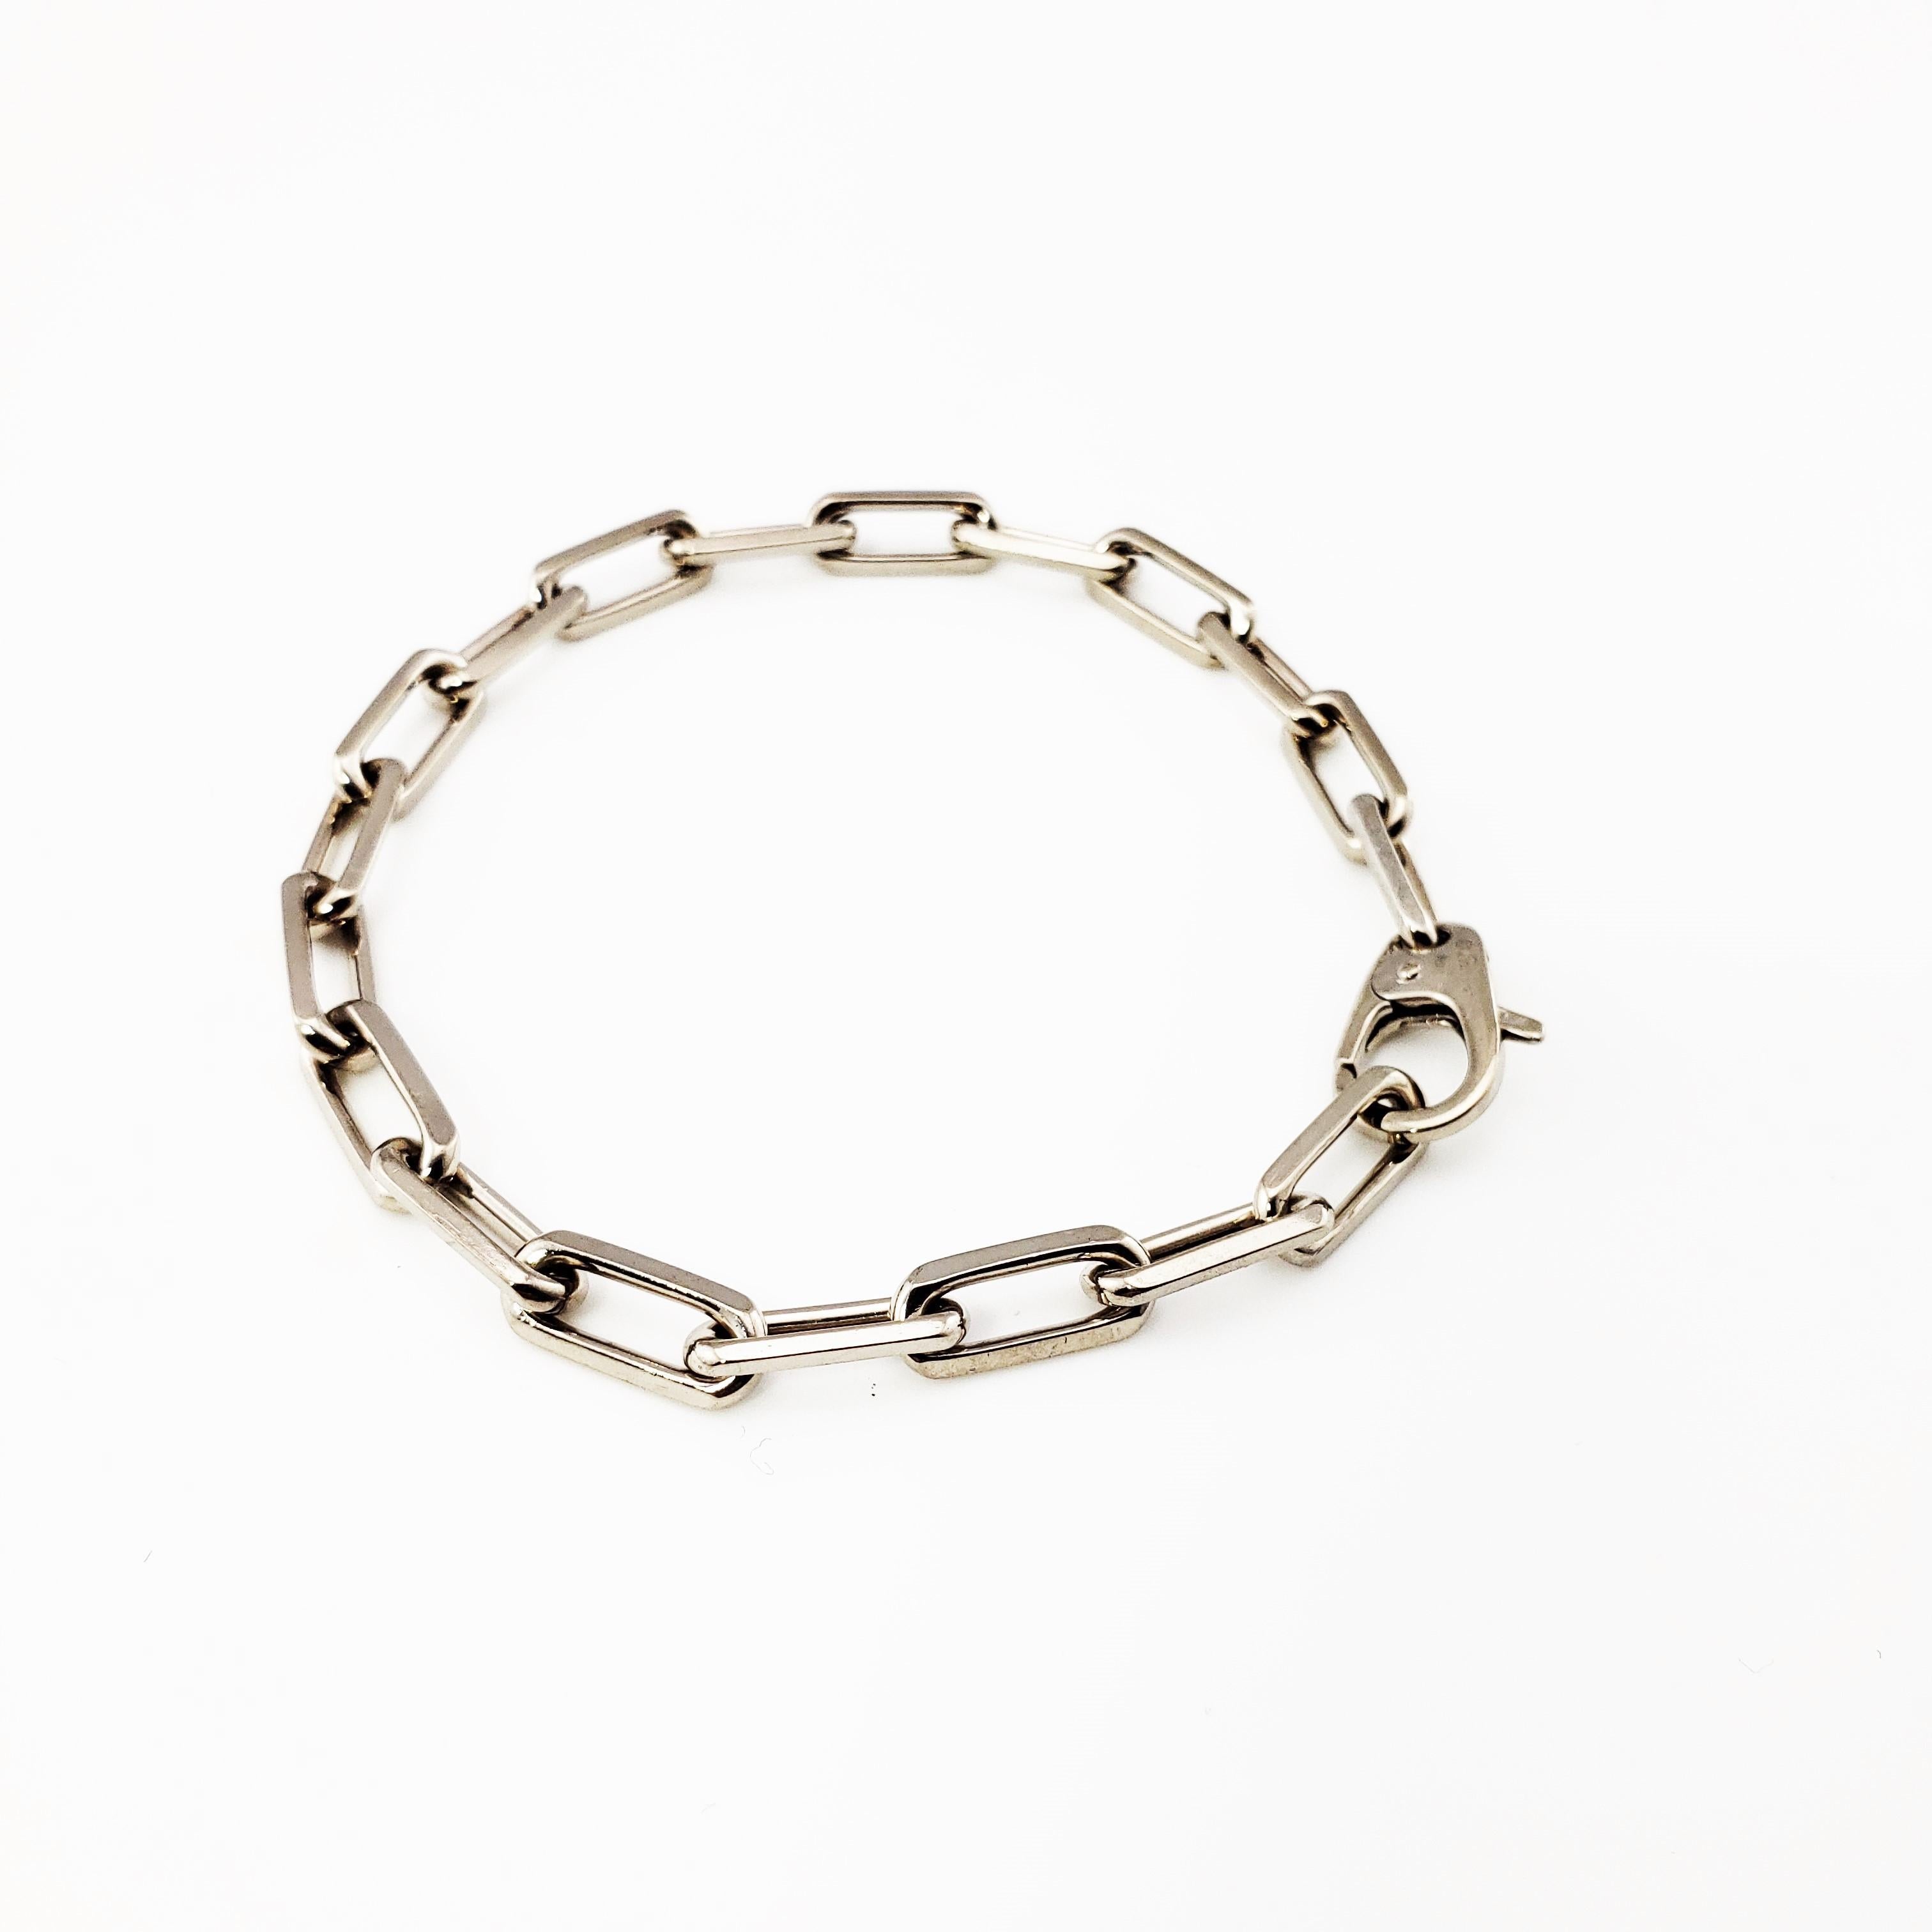 Vintage Cartier 18 Karat White Gold Link Bracelet

This elegant link bracelet is crafted in beautifully detailed 18K white gold by Cartier. Width: 5 mm

Size: 7.5 inches

Weight: 11.0 dwt. / 17.2 gr.

Hallmark: Cartier 750

Very good condition,